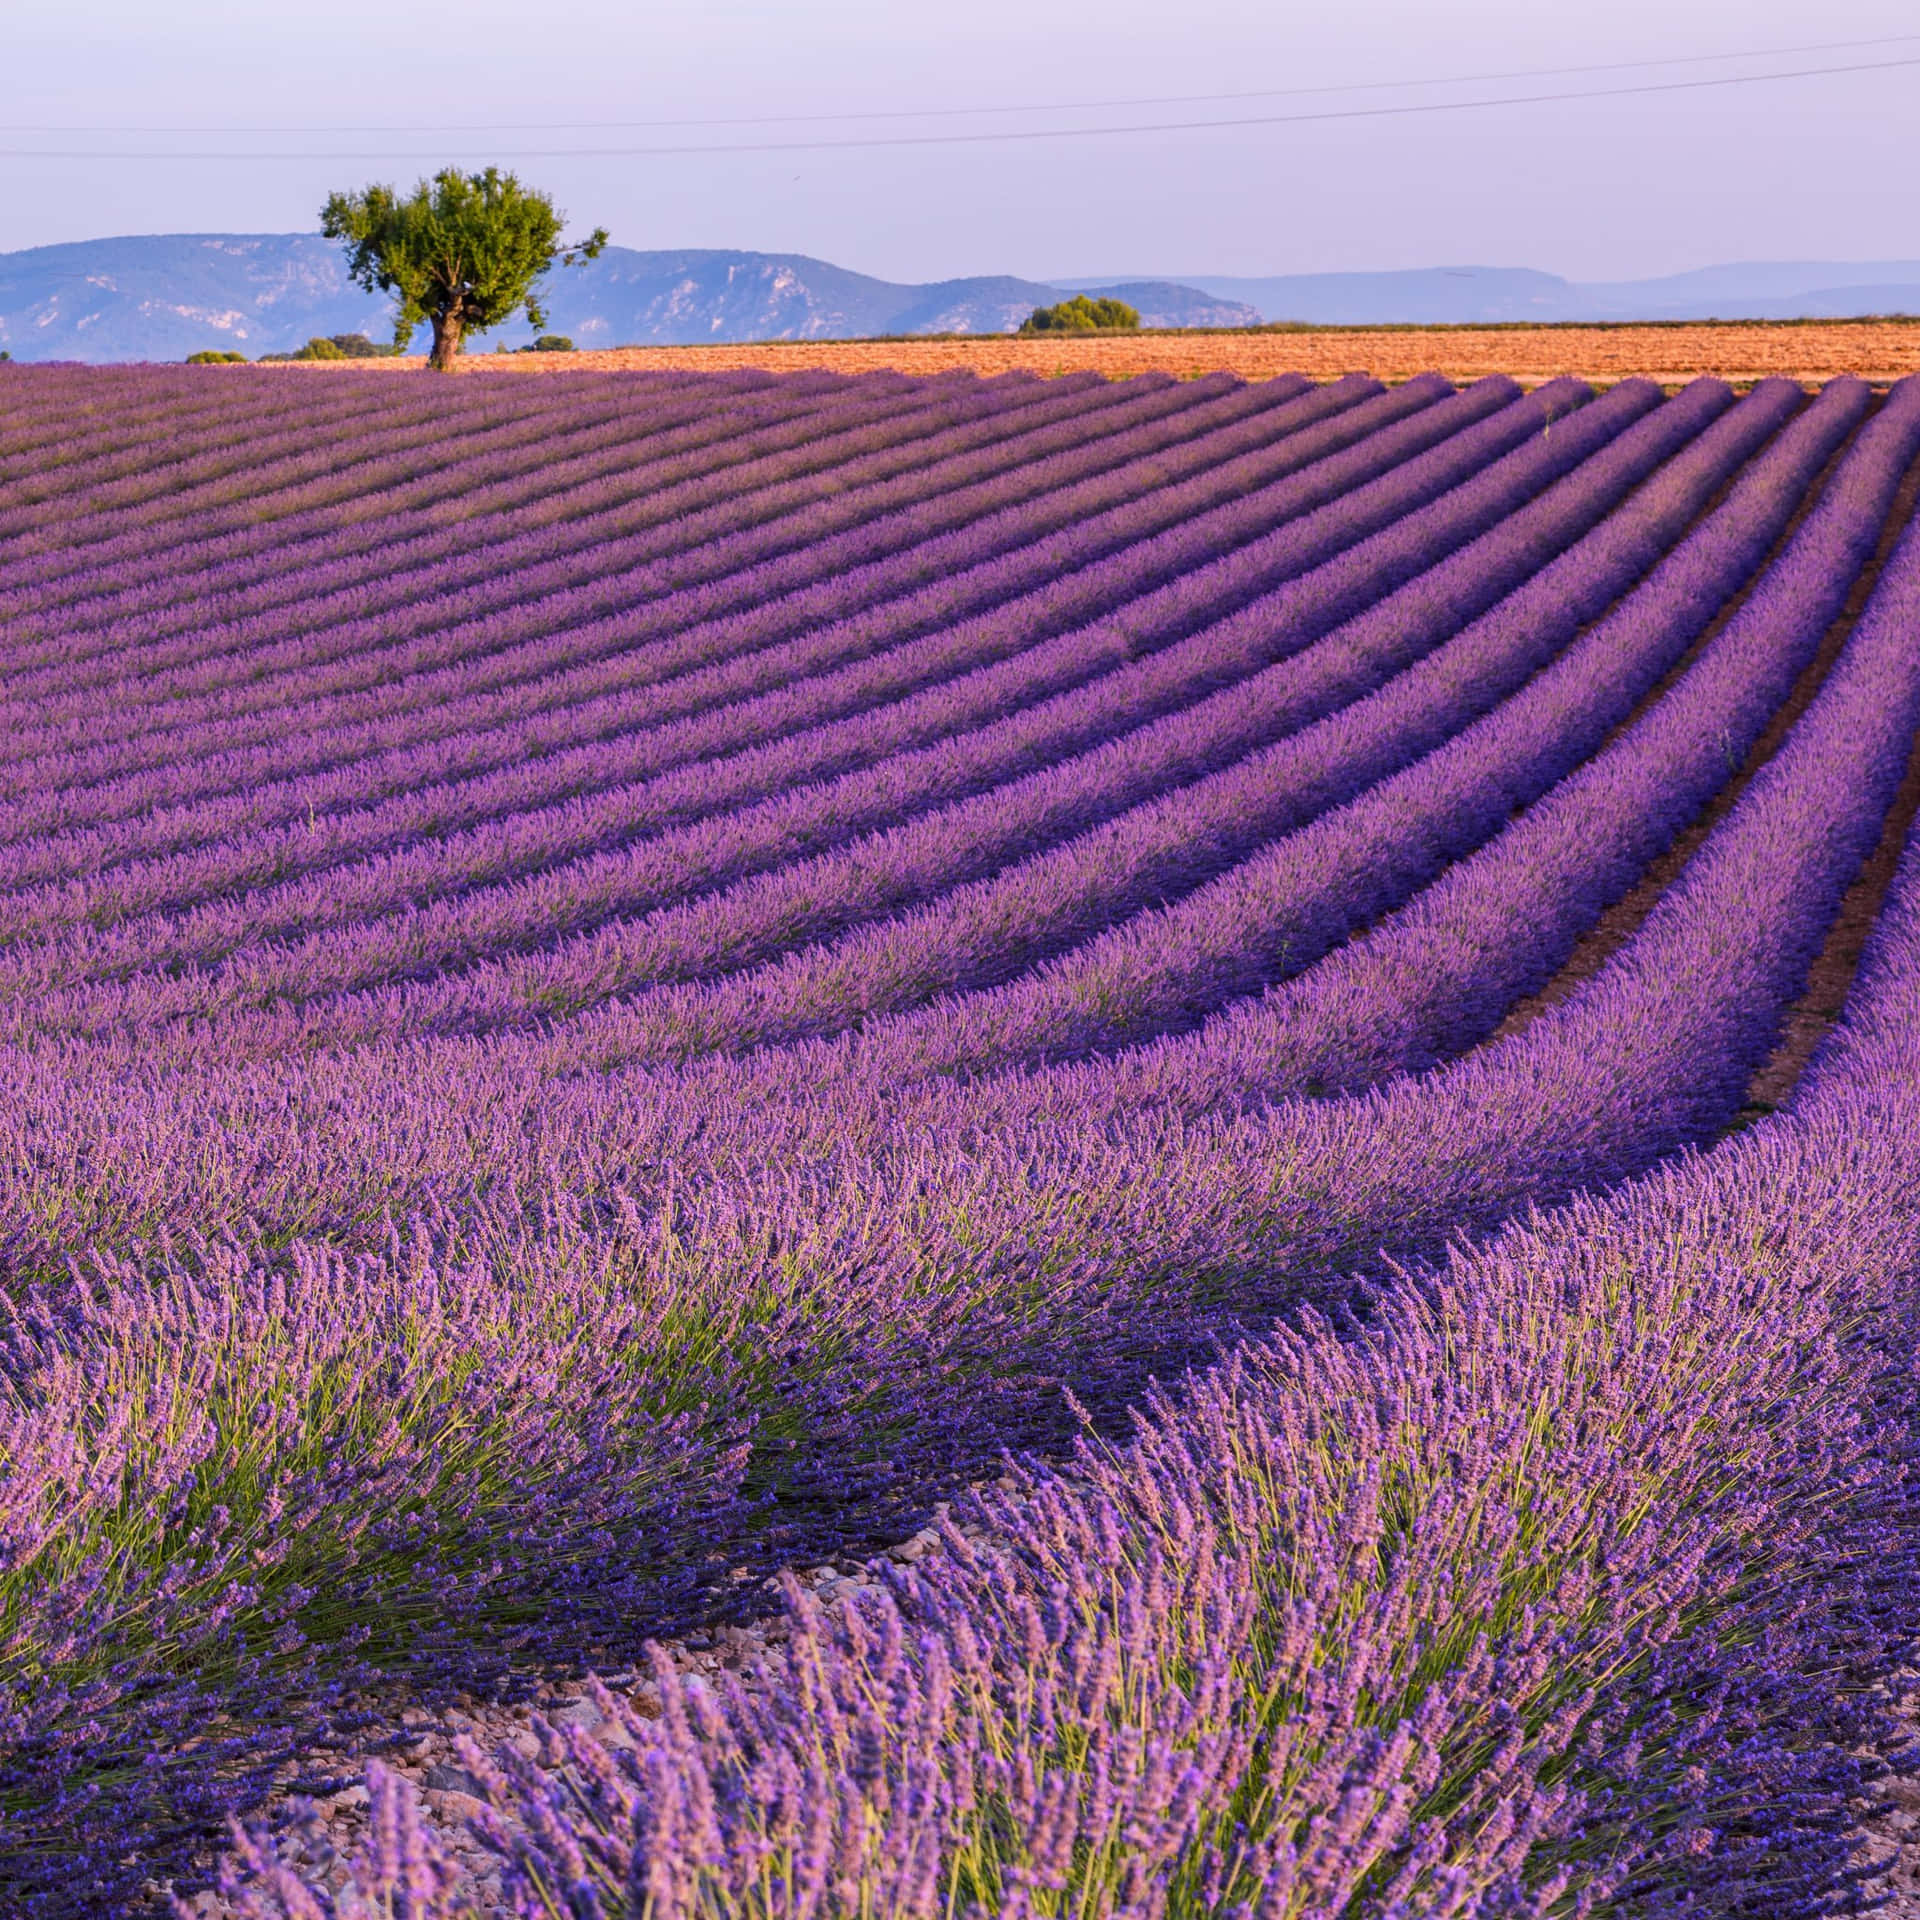 Enjoy a relaxing moment in the beautiful lavender field!